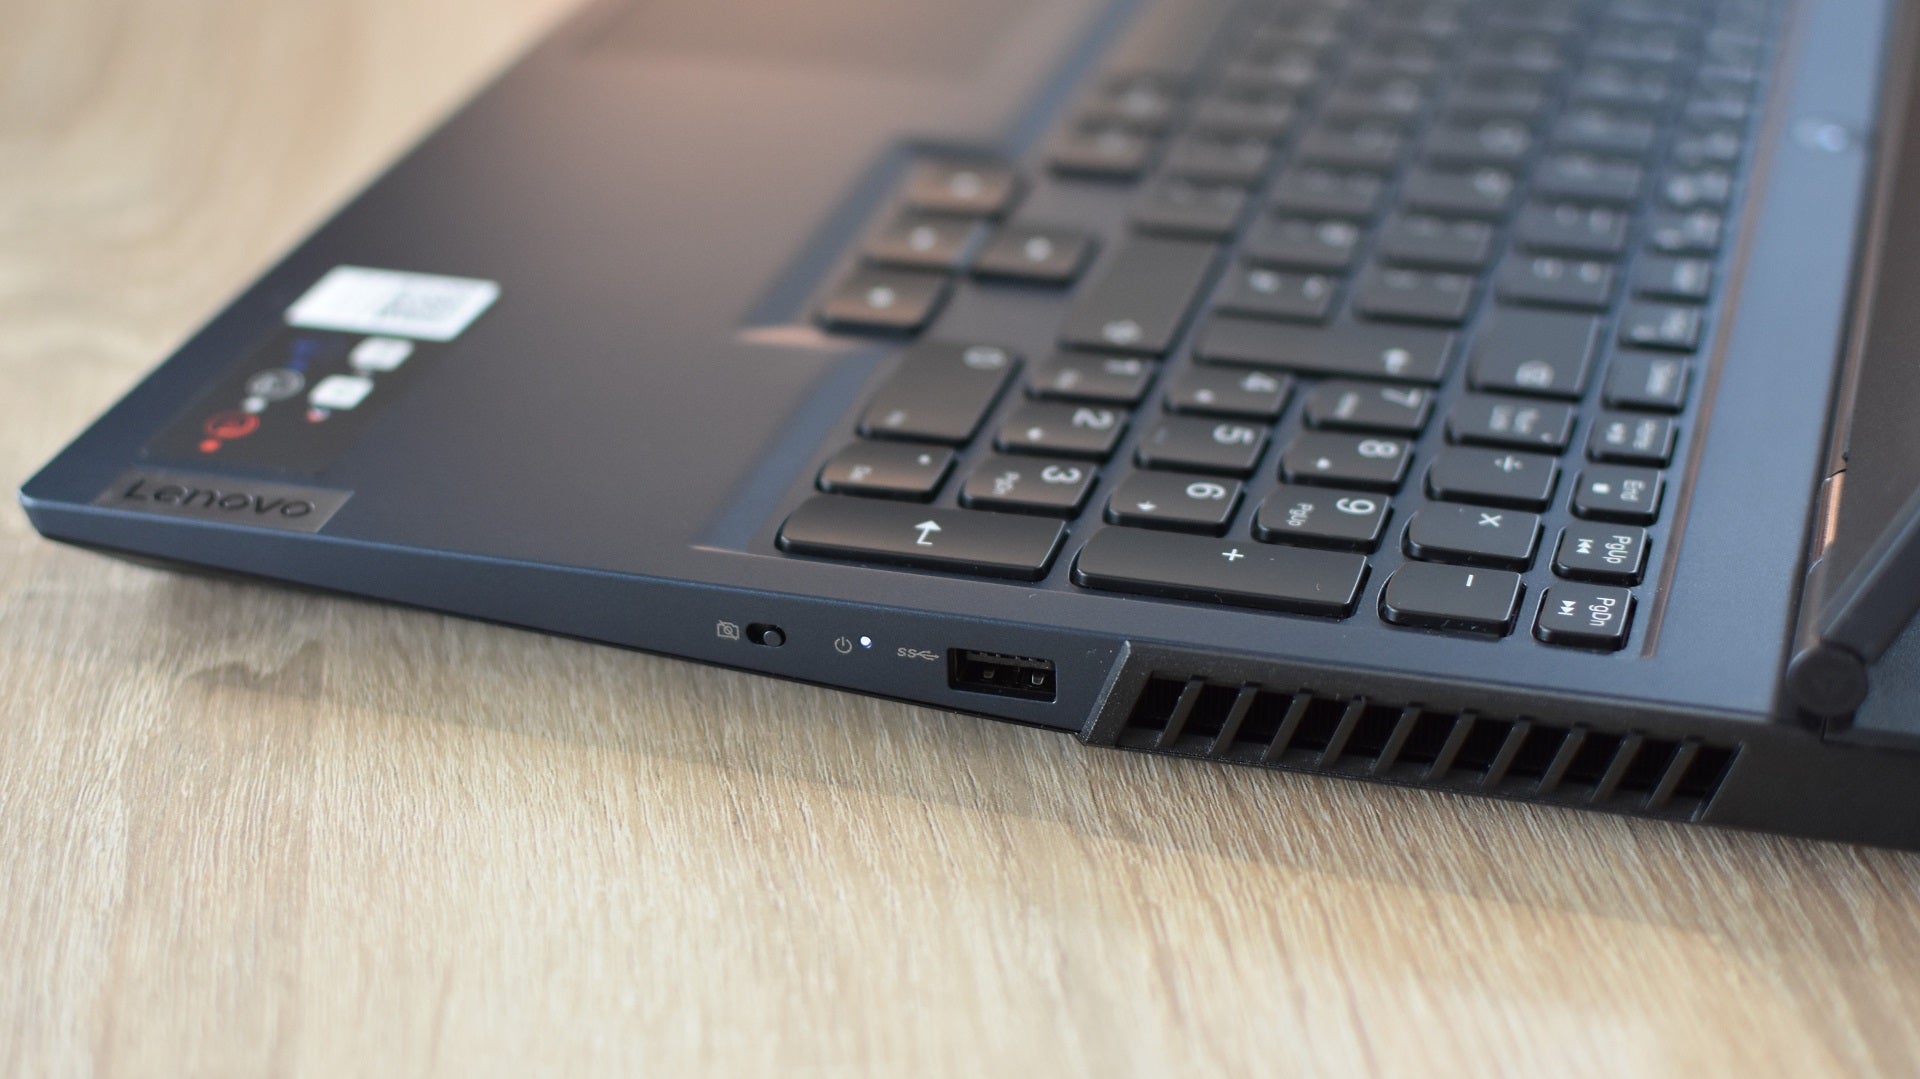 The right-side USB port, webcam killswitch and air vent on the Lenovo Legion 5 gaming laptop.